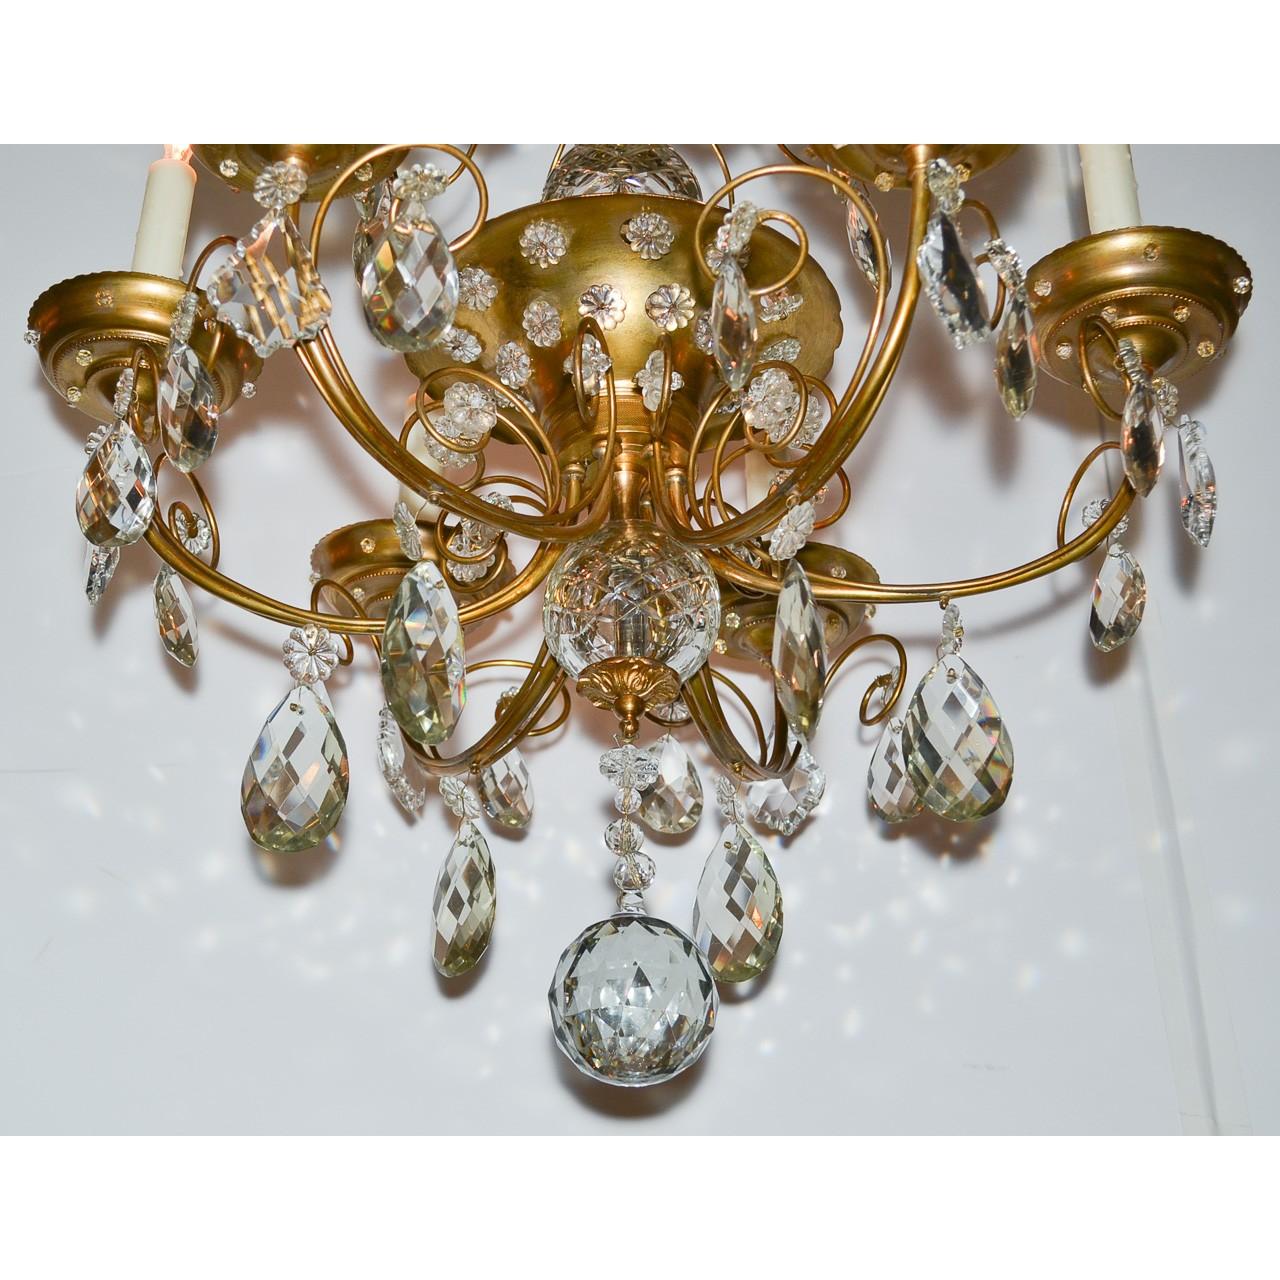 High style midcentury French brass and crystal chandelier, in the style of Maison Jansen. The fancy crystal spray crown above a small tier of crystal almond drops and a brass flared-mouth midsection mounted with scrolling arms decorated with faceted